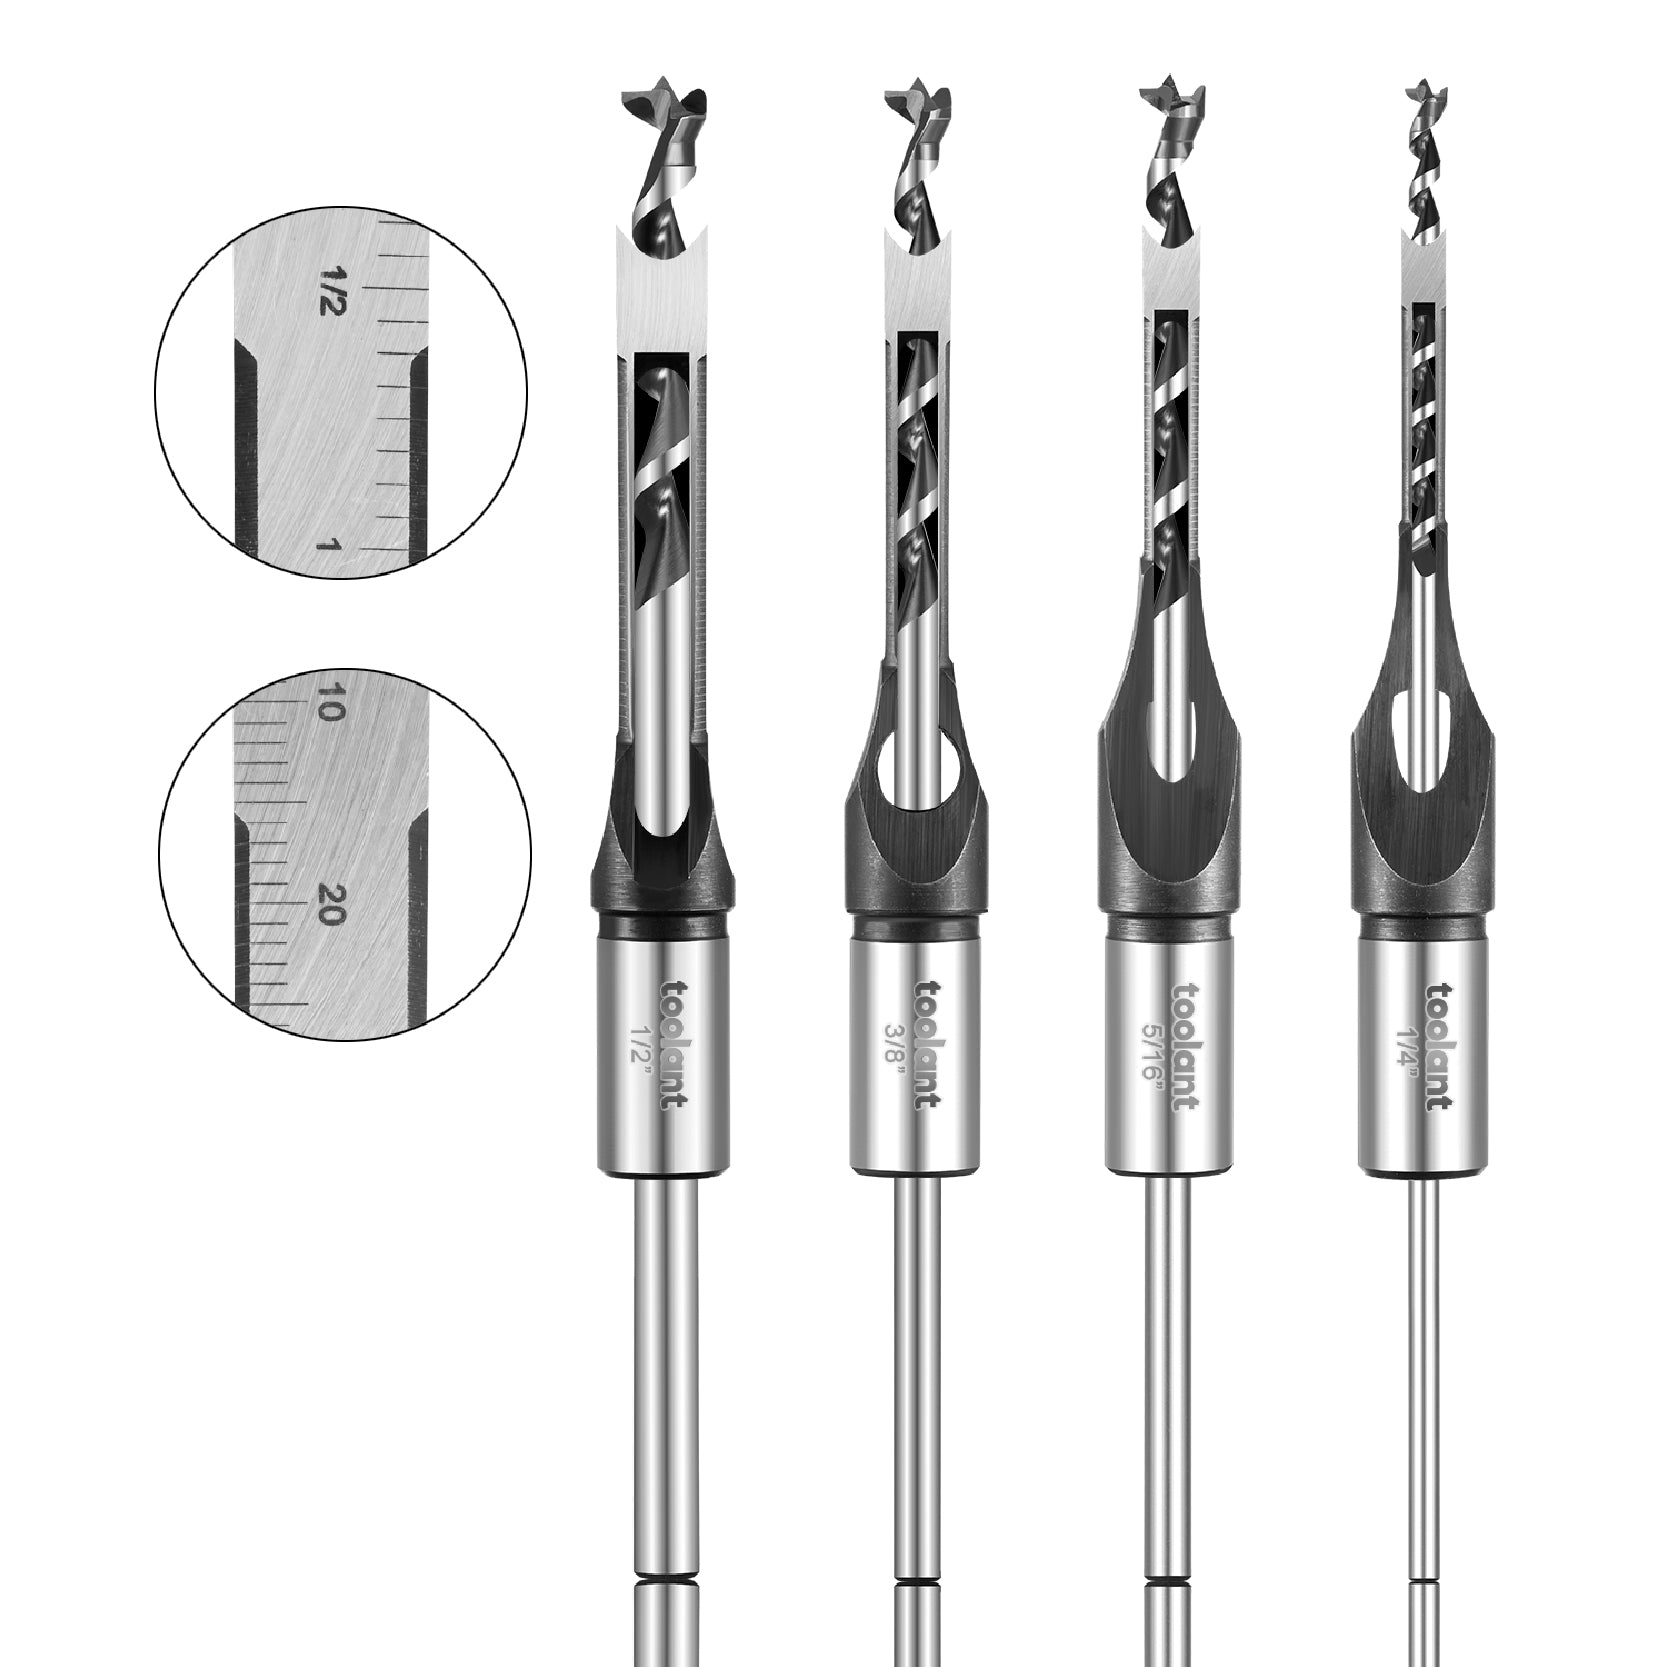 Woodworking Mortising Chisel Sets, Square Hole Drill Bit for Mortise Machine (1/4'', 5/16'', 3/8'', 1/2''), 3/4" Chuck